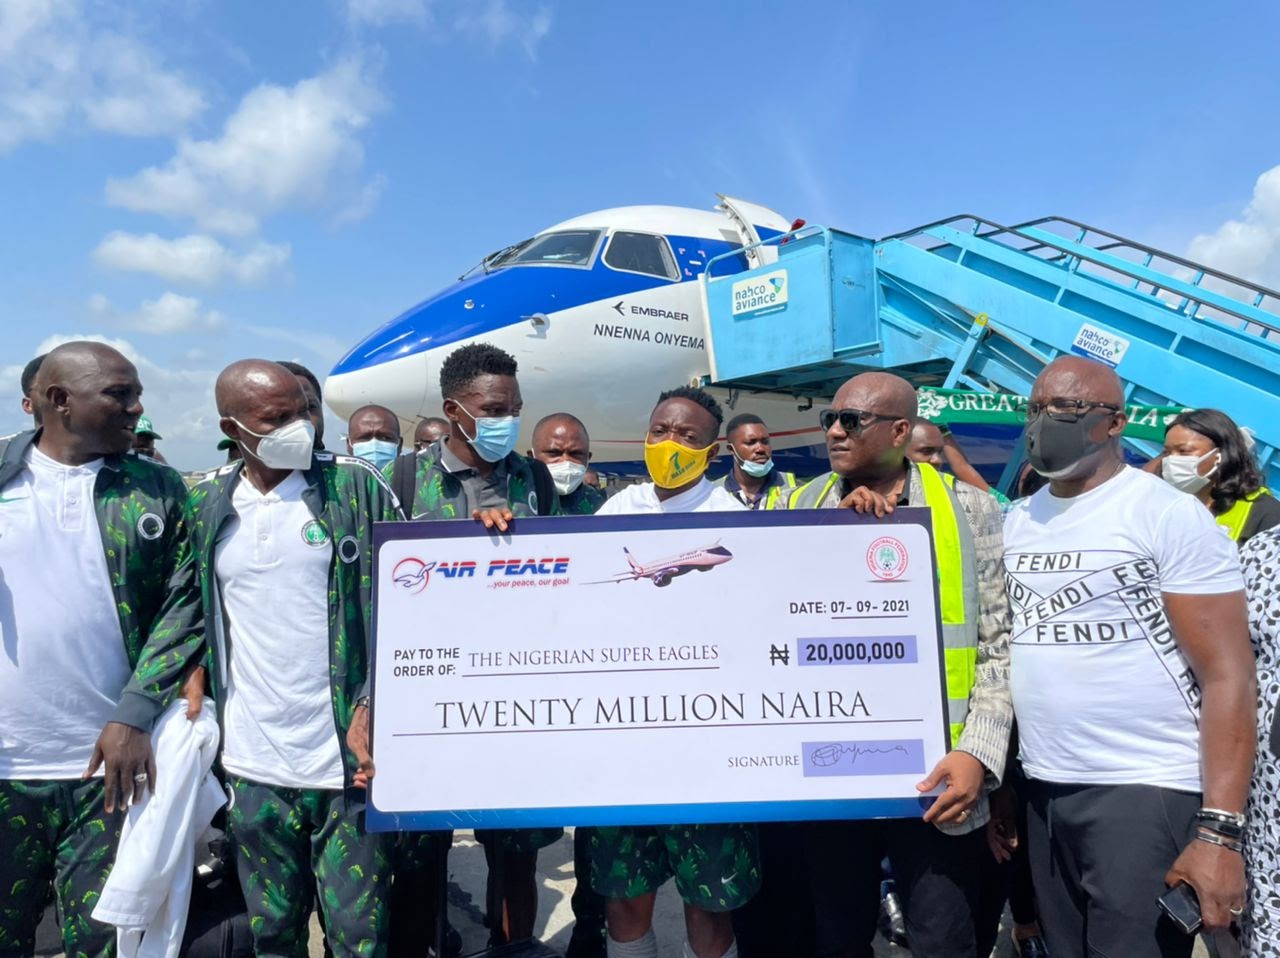 Air Peace boss fulfills cash promise, gives Super Eagles N20m